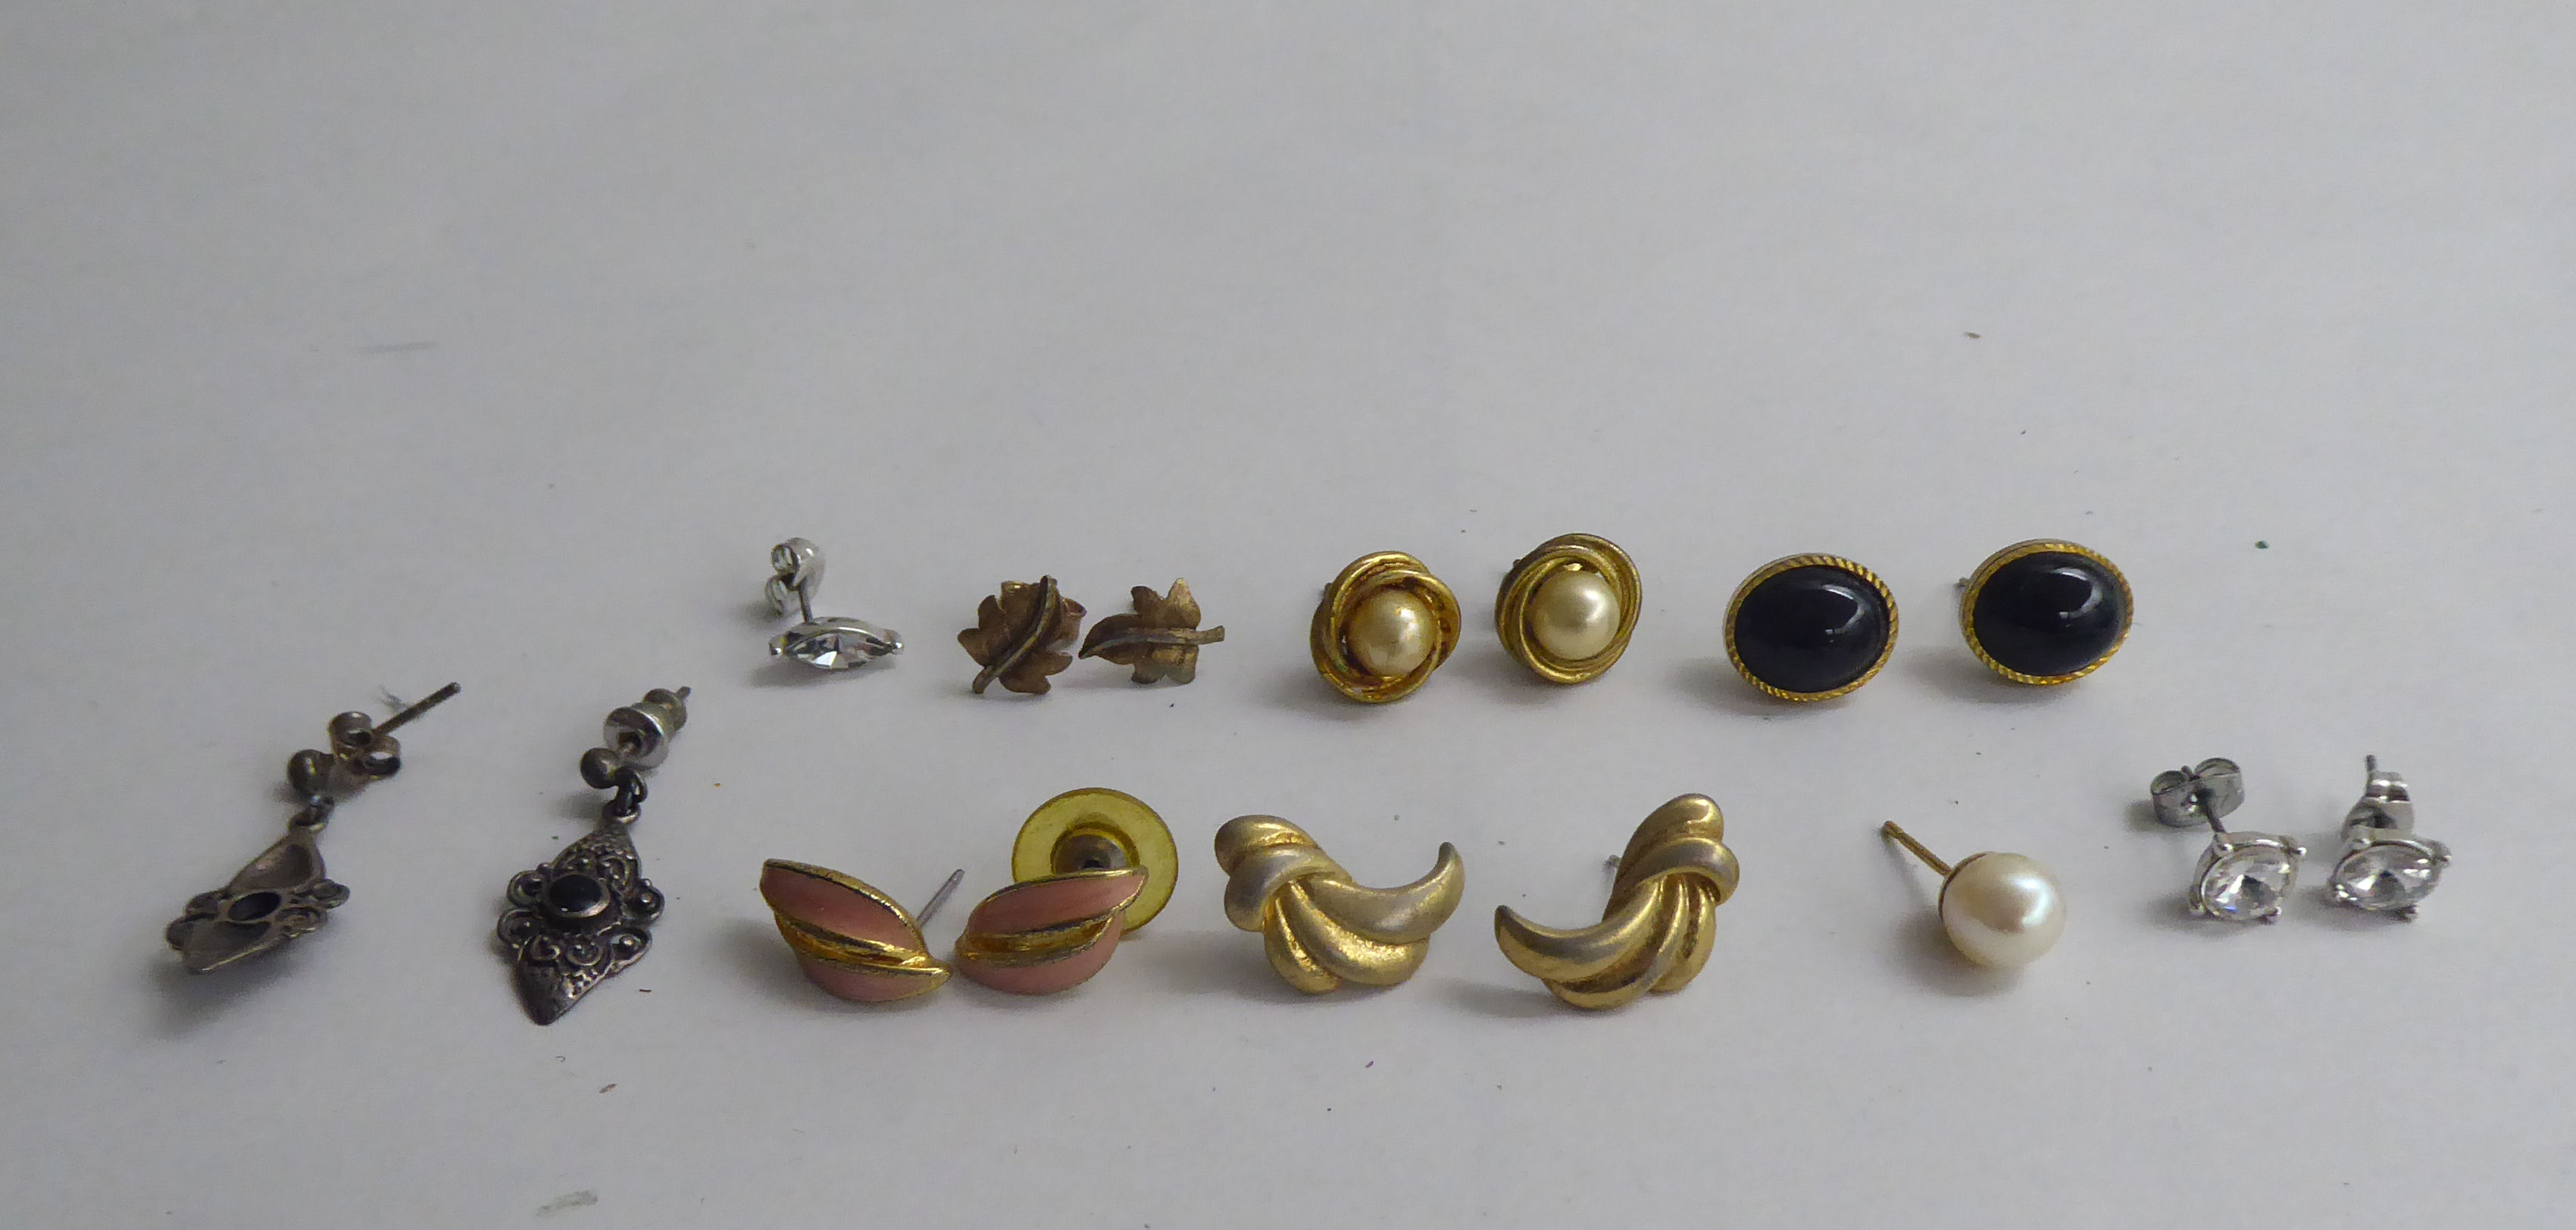 Costume jewellery and items of personal ornament: to include earrings and necklaces - Image 4 of 8